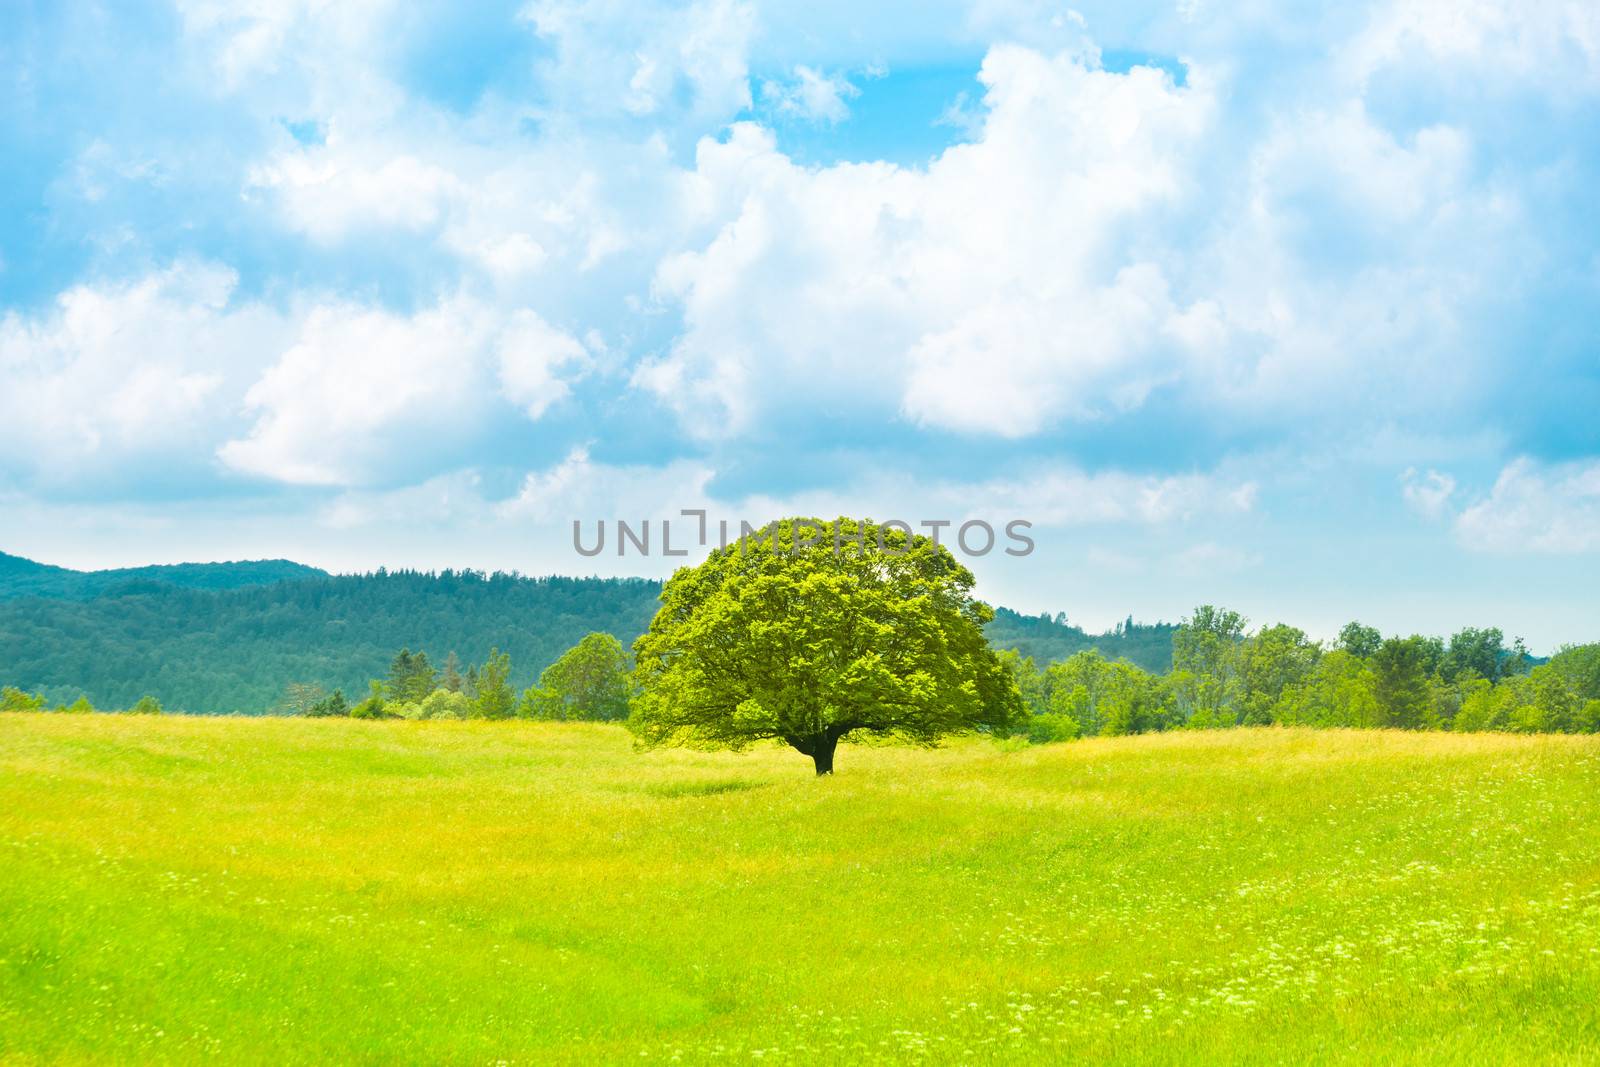 Green planet - Earth; green summer landscape scenic view.